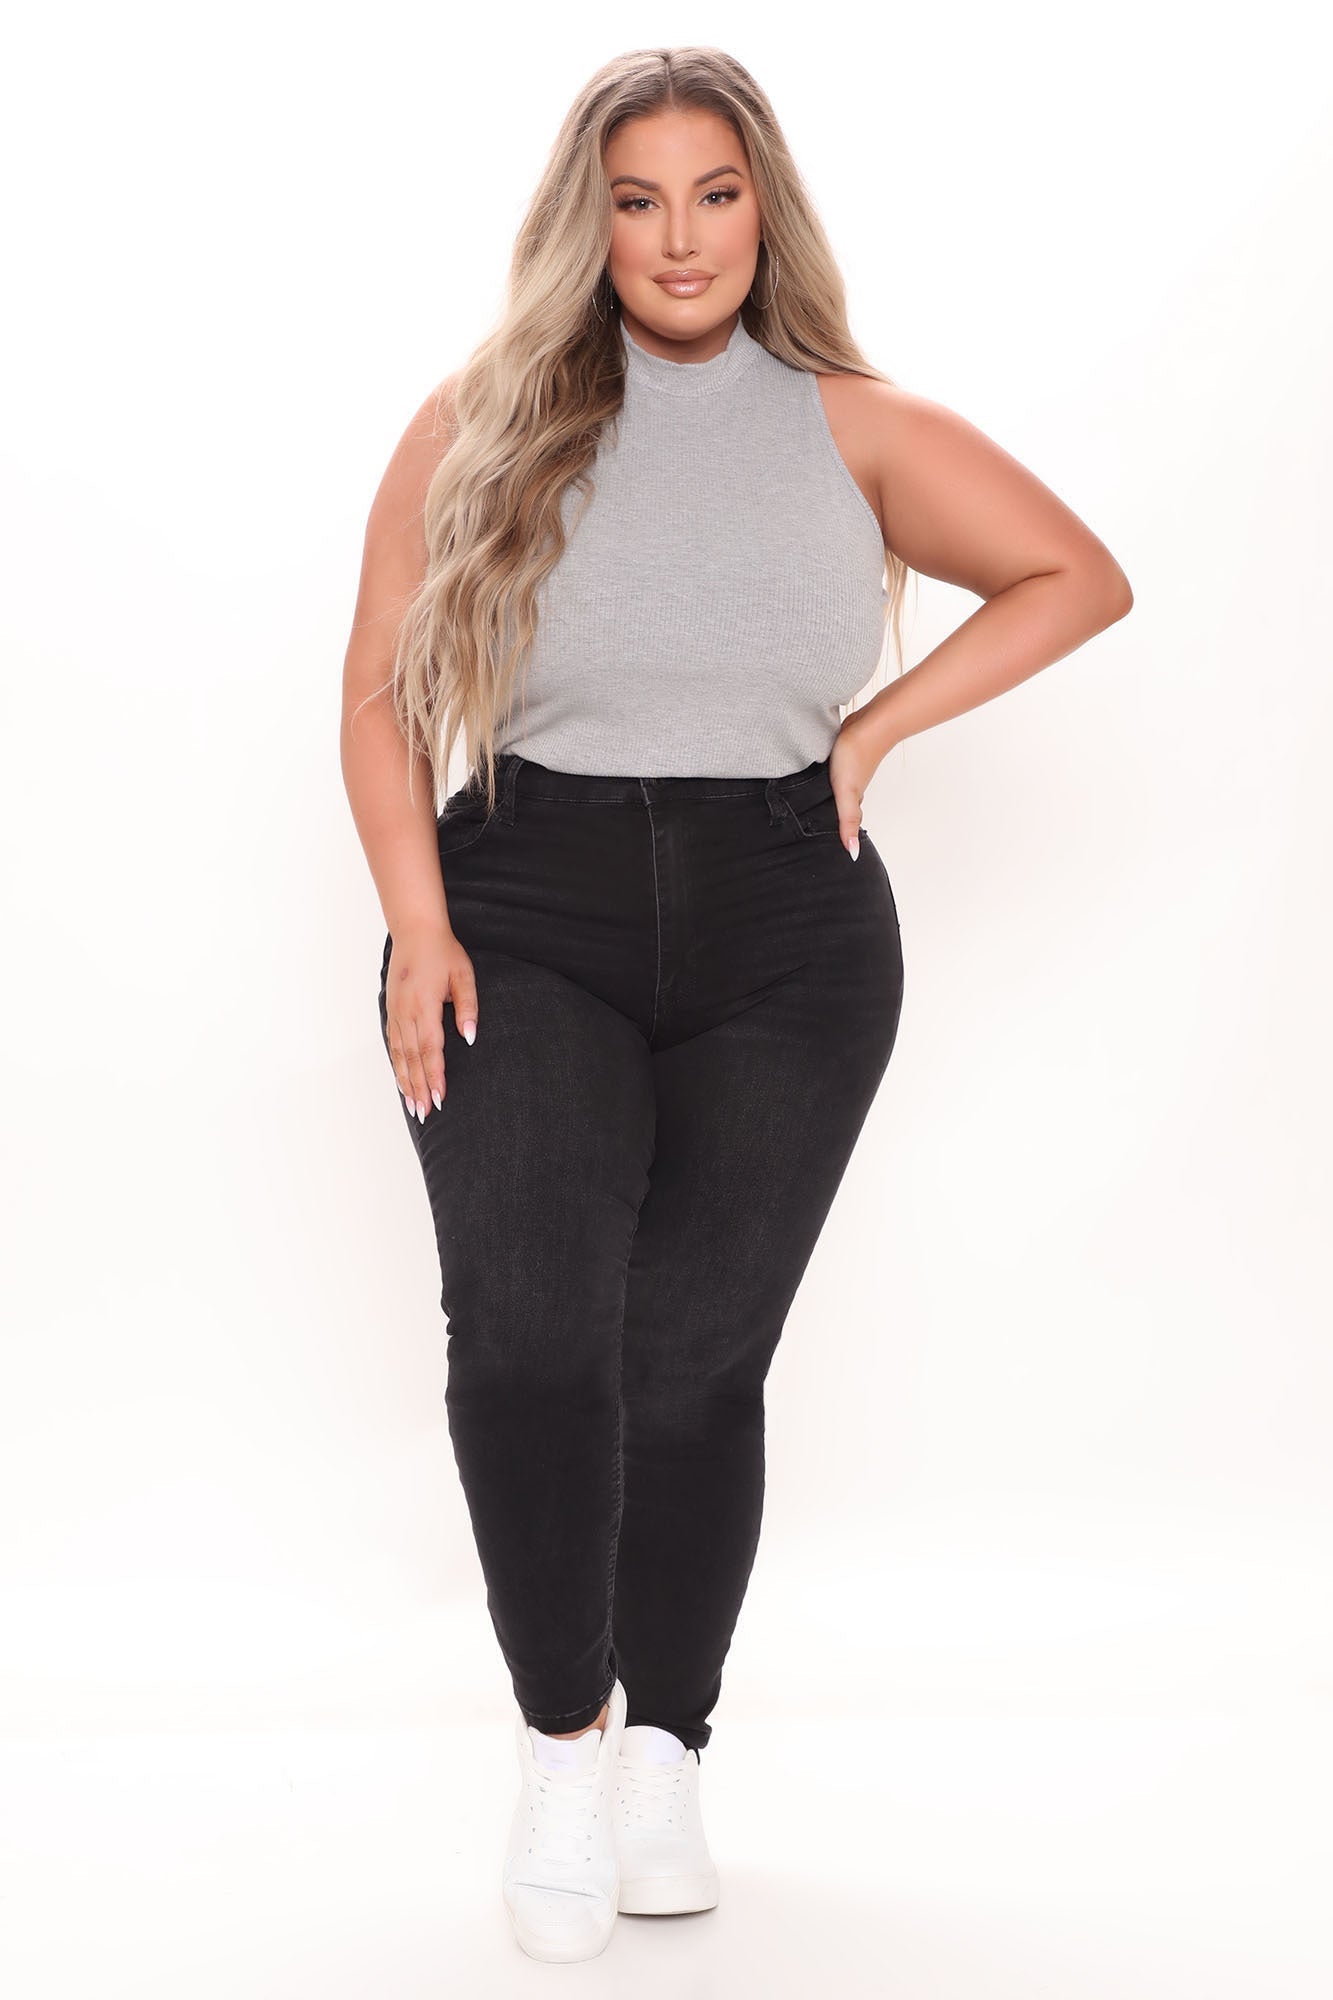 Out On The Town Skinny Jeans - Black Sai Feel